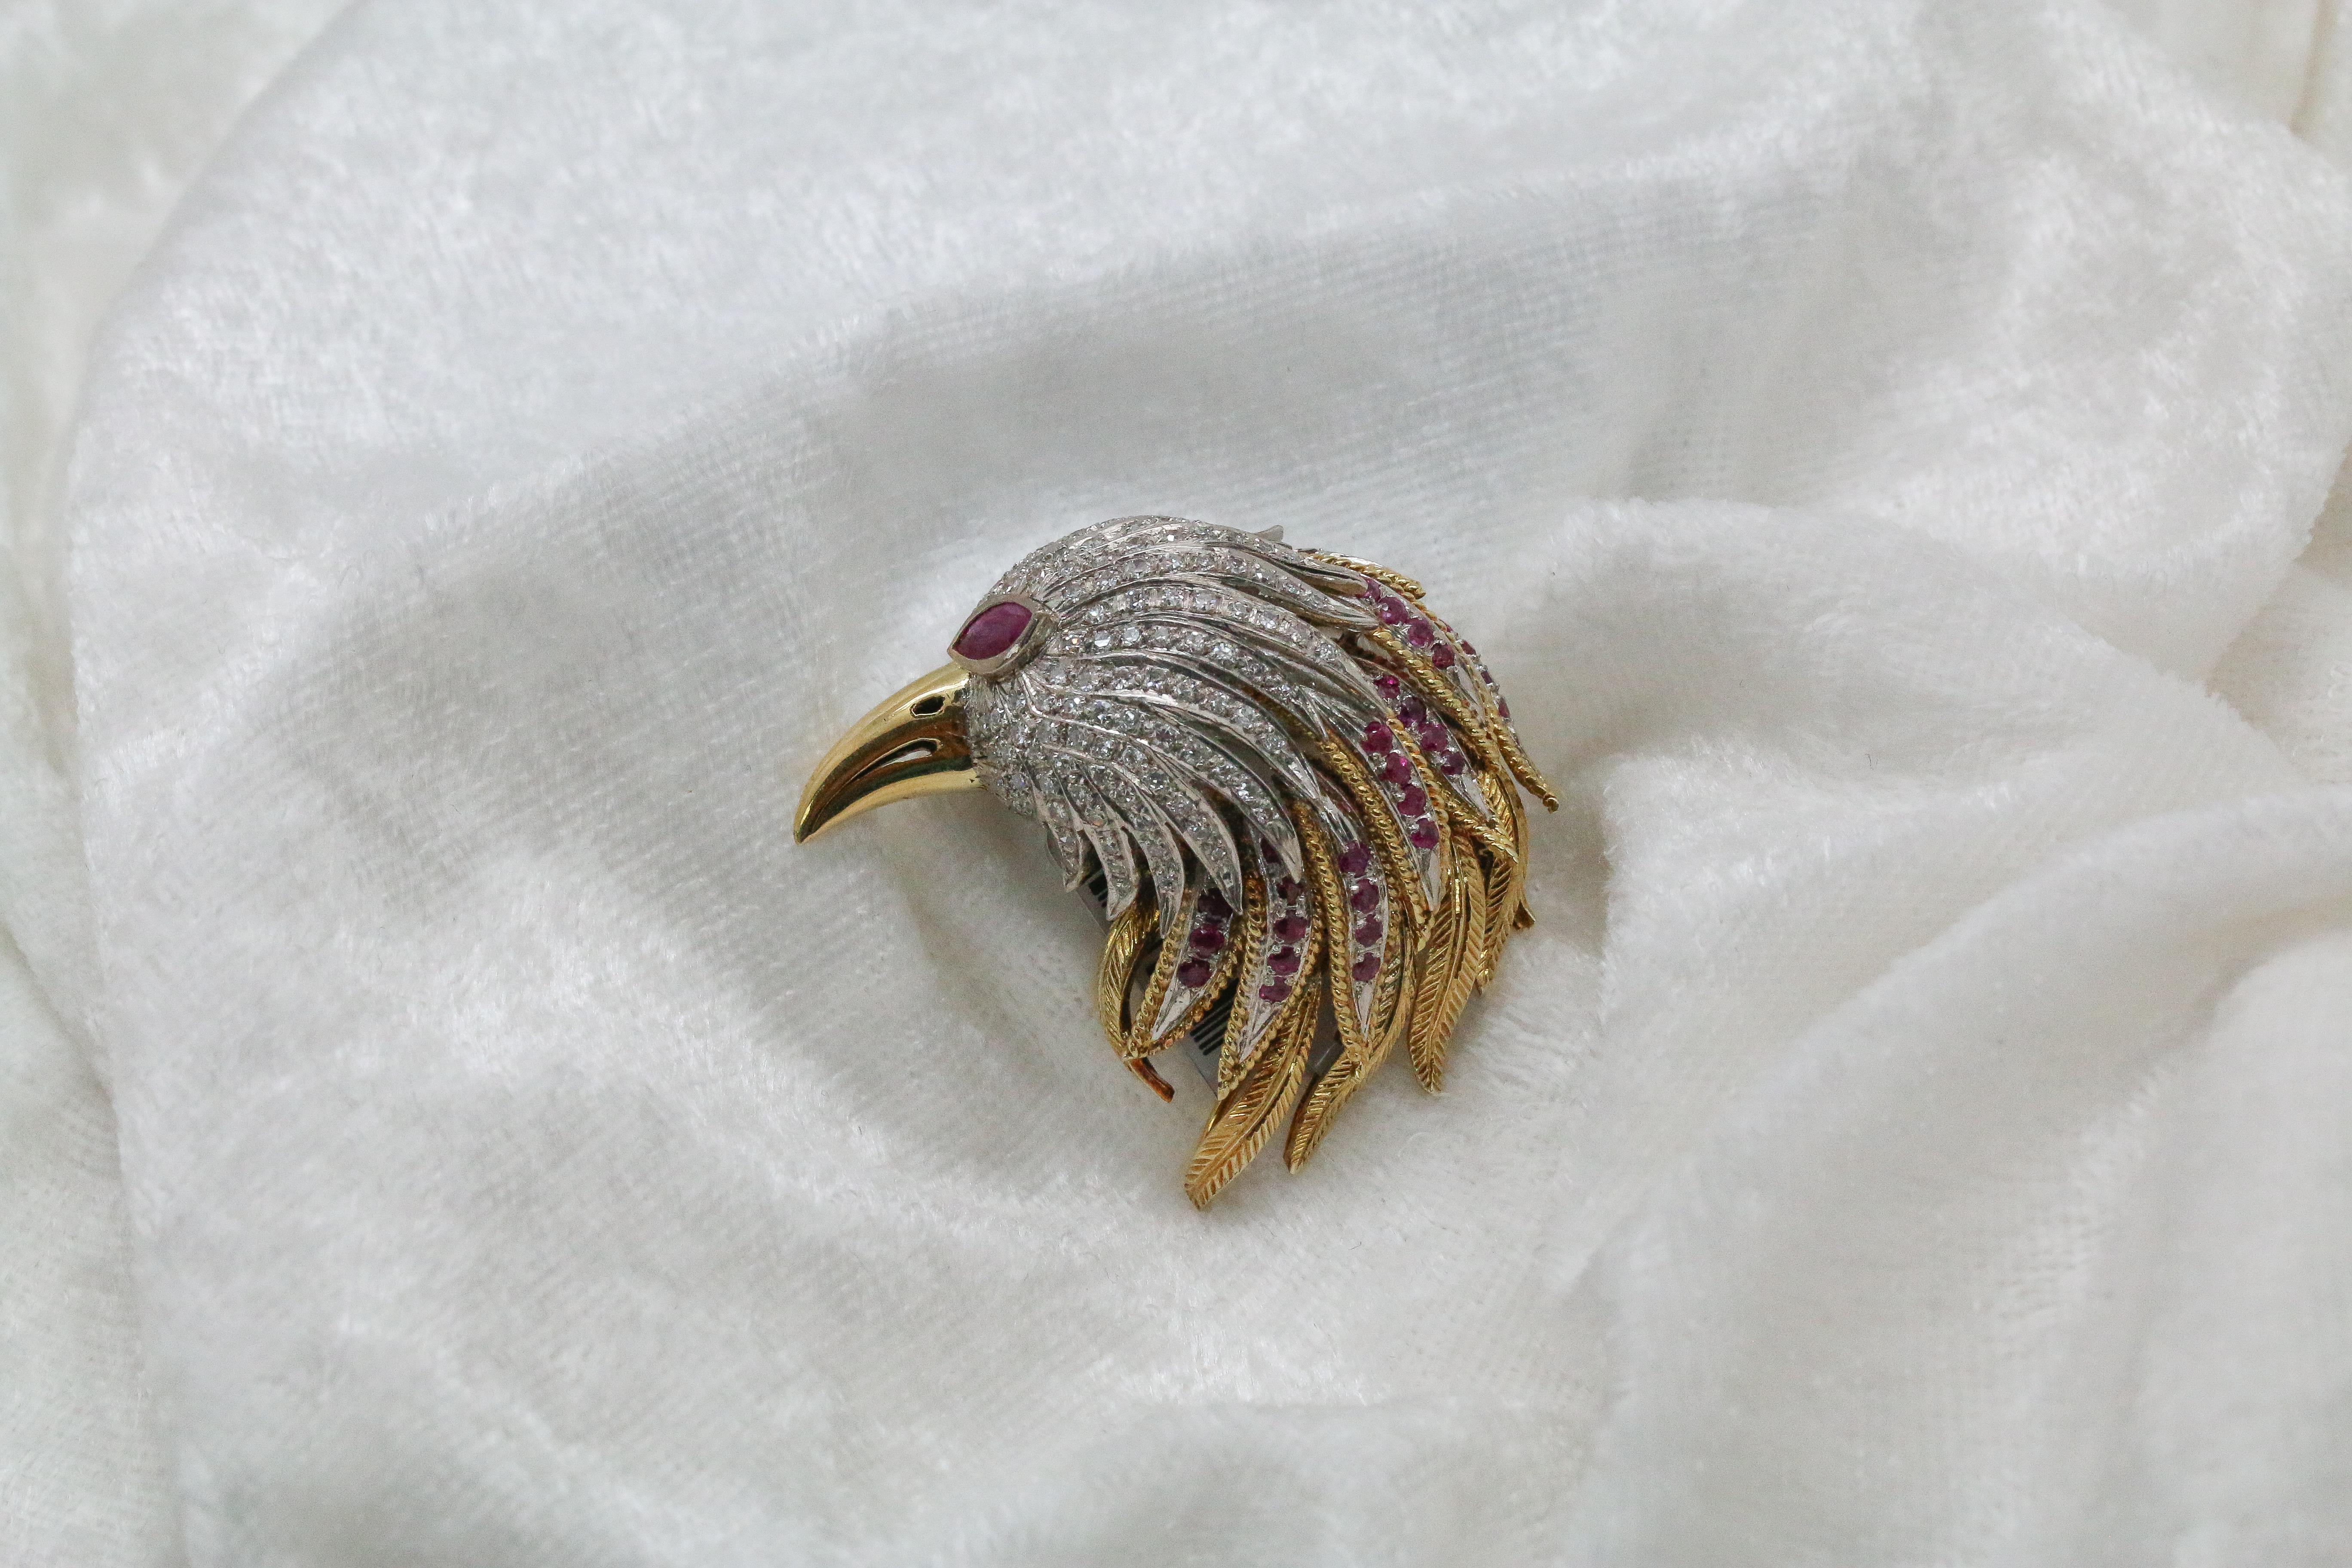 Showcasing a stunning, large and impressive 14kt Two-Tone White & Yellow Gold Bird Estate Brooch featuring natural round Rubies .28ct and natural round Diamonds .01ct with a beautiful all natural marquise cut Ruby for the eye of the bird. This